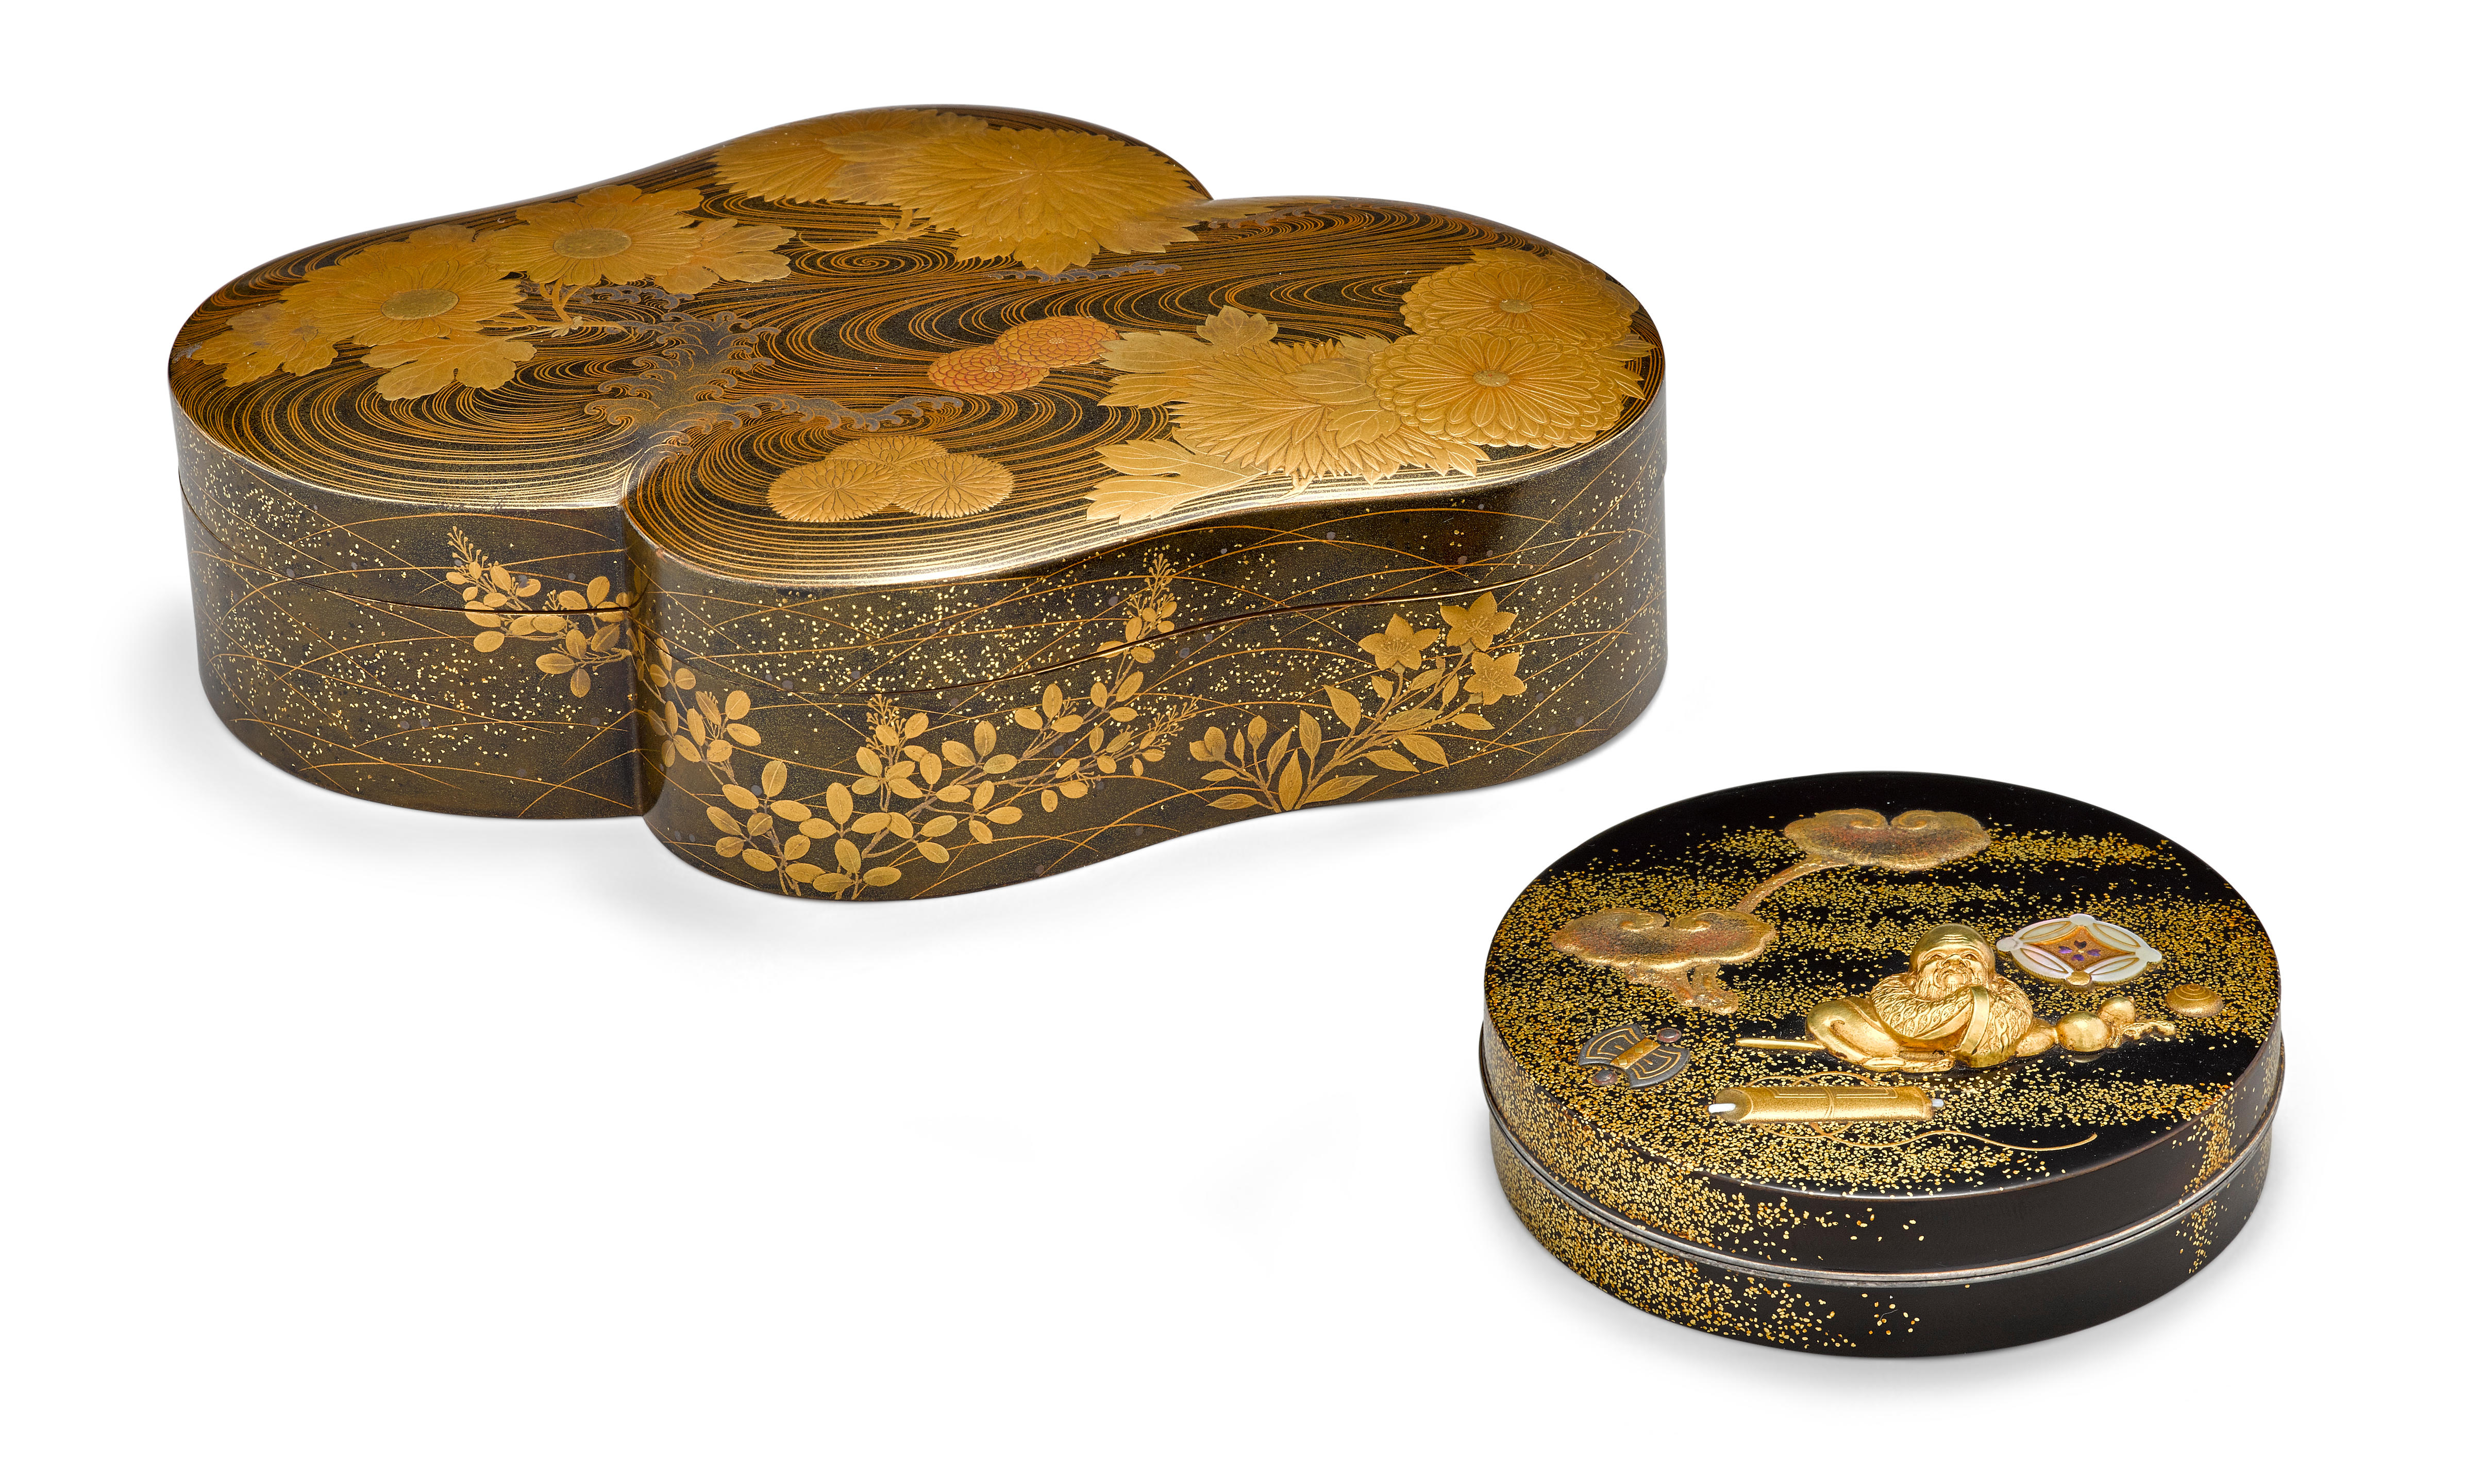 Two lacquer boxes and covers